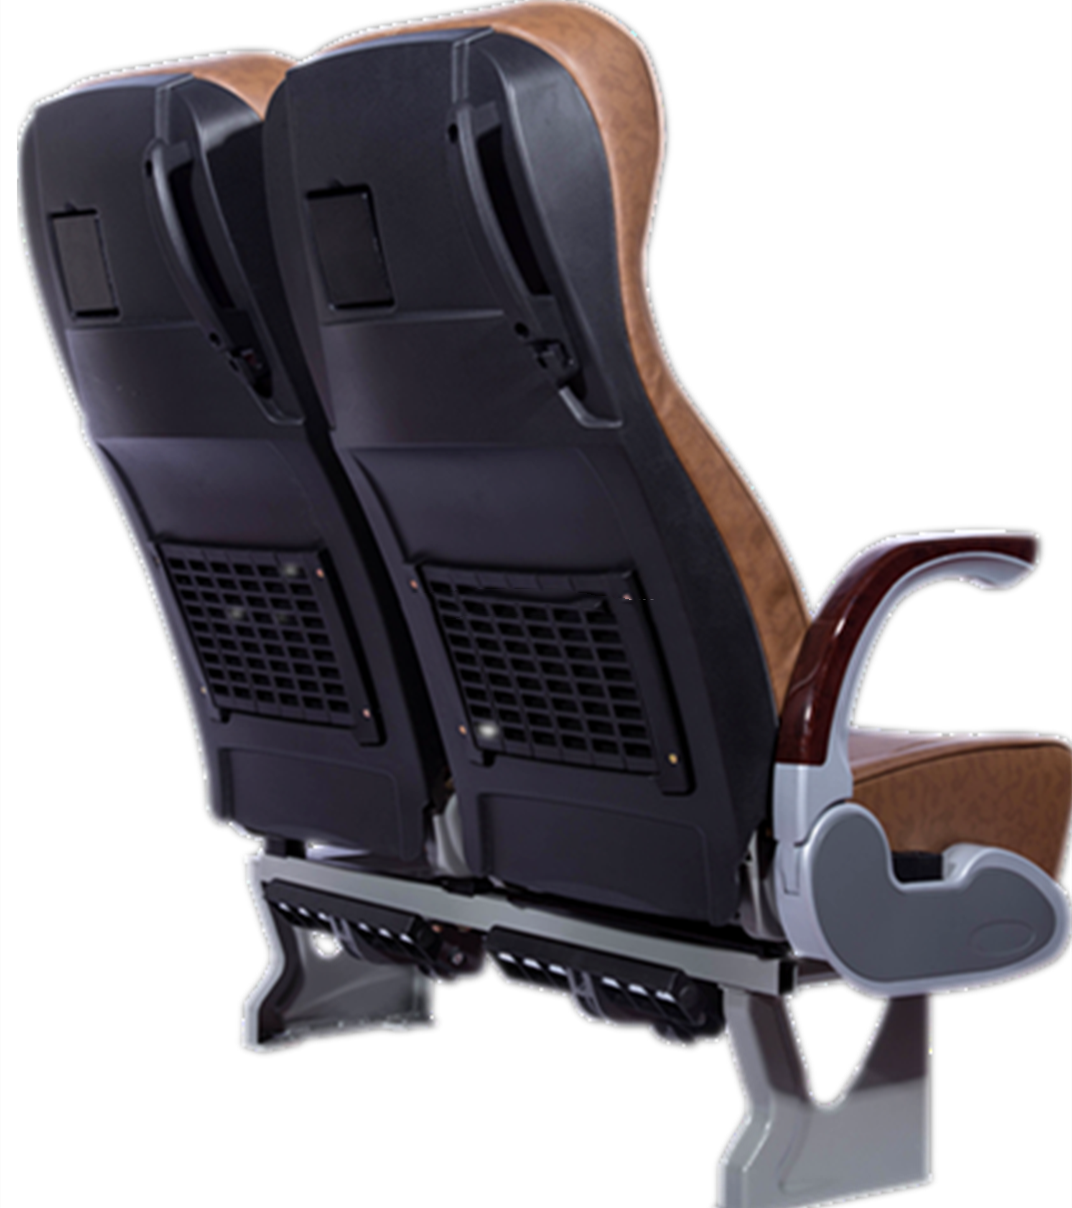 General Seat Type and Leather Material school bus seats for Asia market(图5)